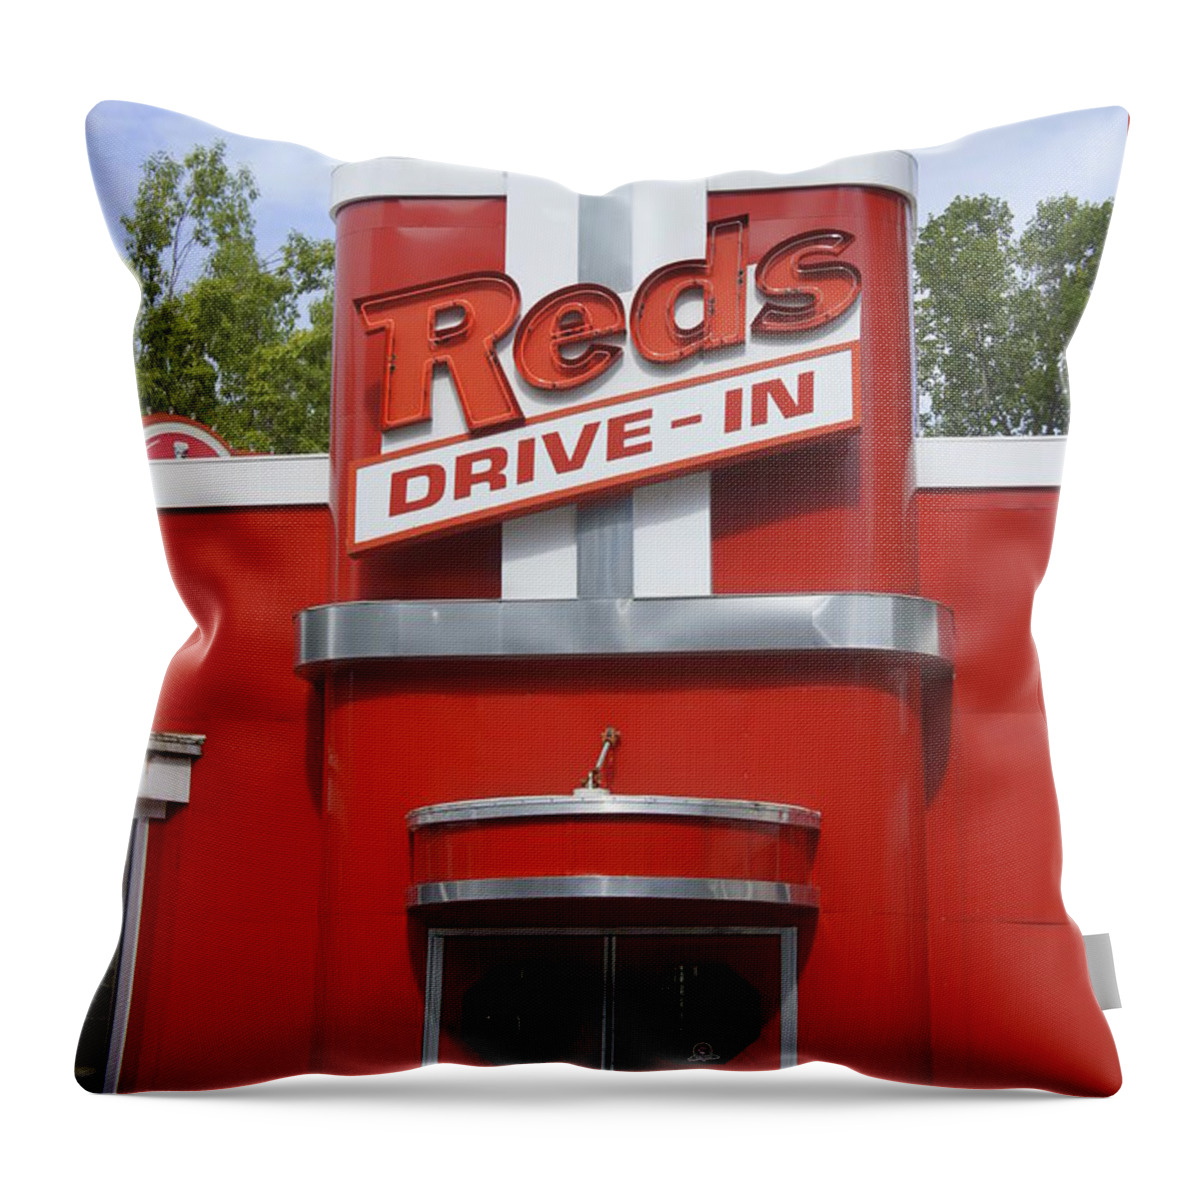 Reds Drive In Throw Pillow featuring the photograph Reds Drive- In by Laurie Perry